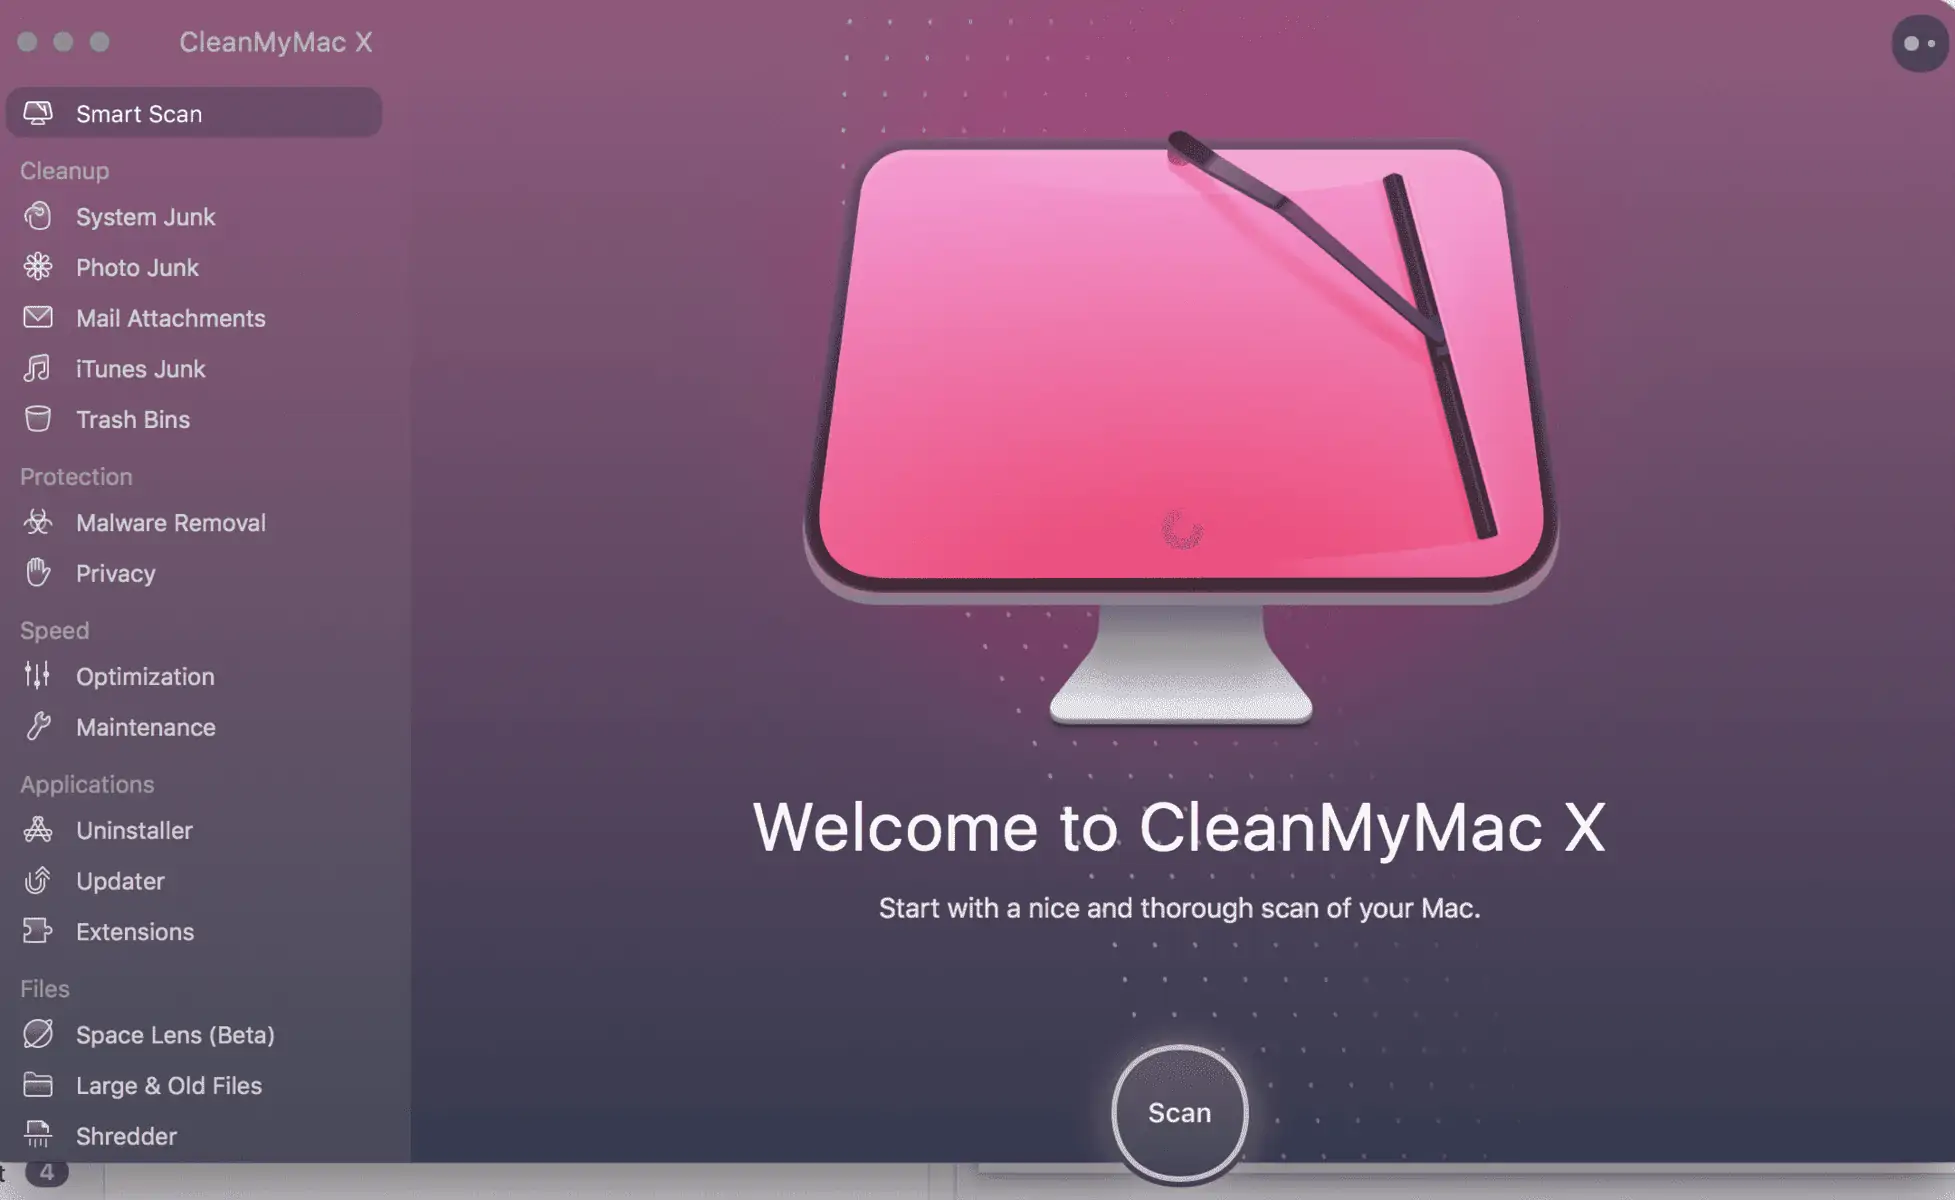 starting a scan in cleanmymac program.